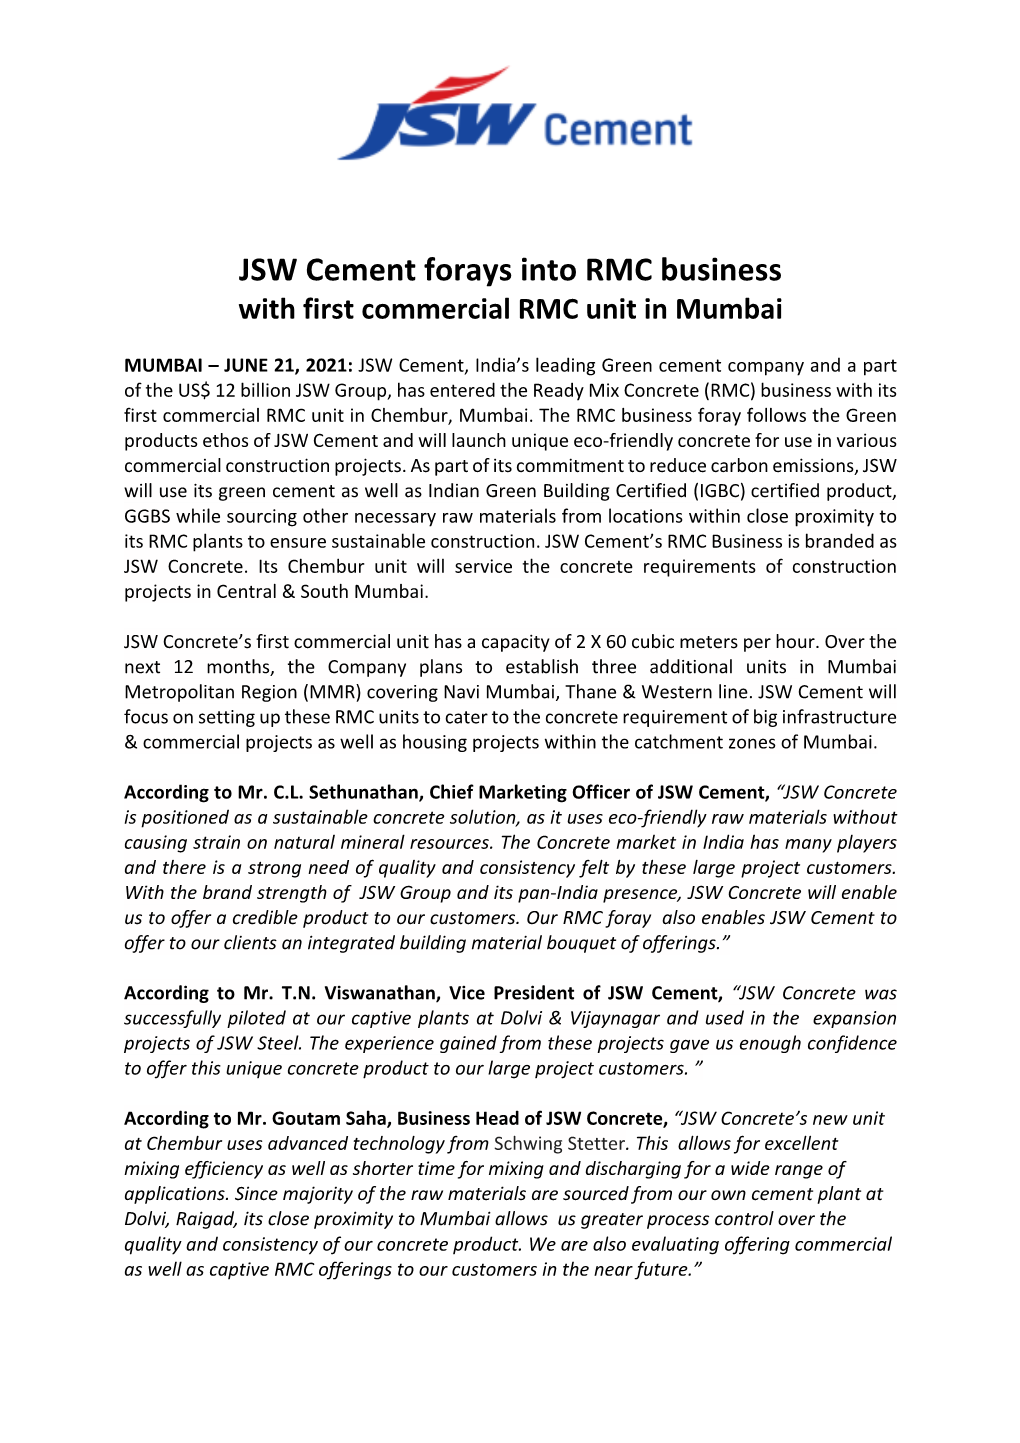 JSW Cement Forays Into RMC Business with First Commercial RMC Unit in Mumbai